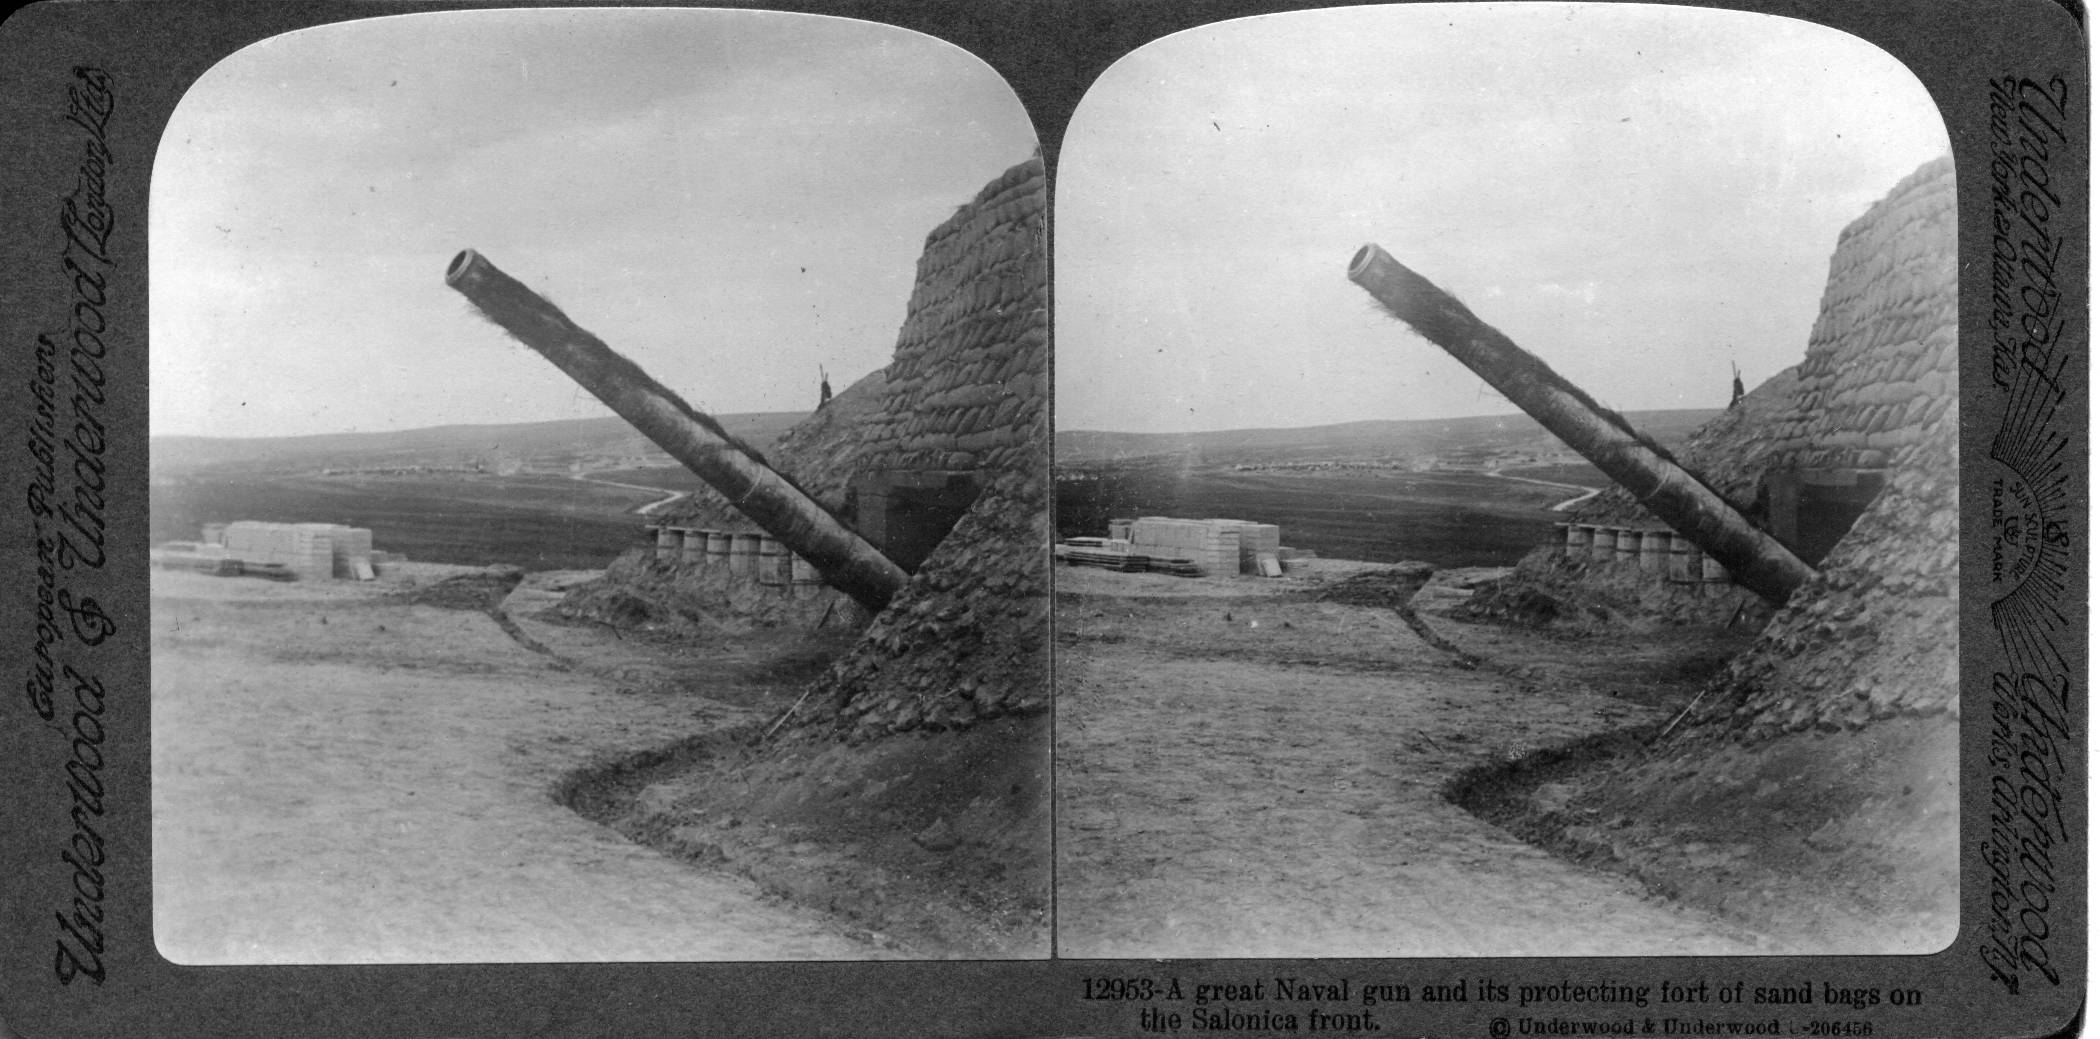 A great naval gun and its protecting fort of sand bags on the Salonica front